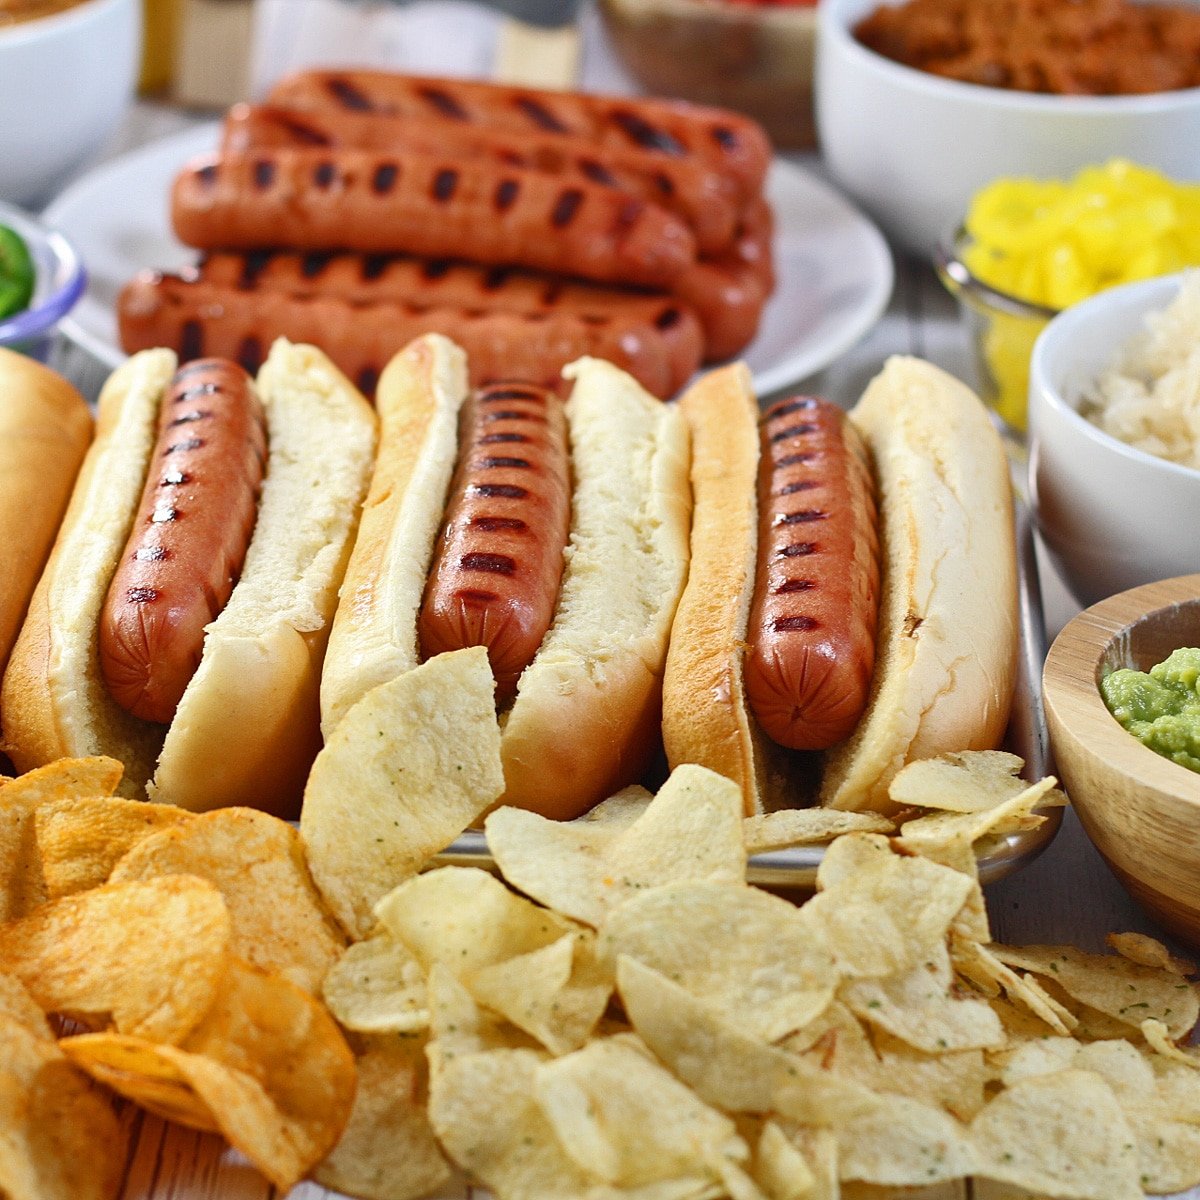 Ultimate Hot Dog Bar Ideas for a Party - Celebrations at Home